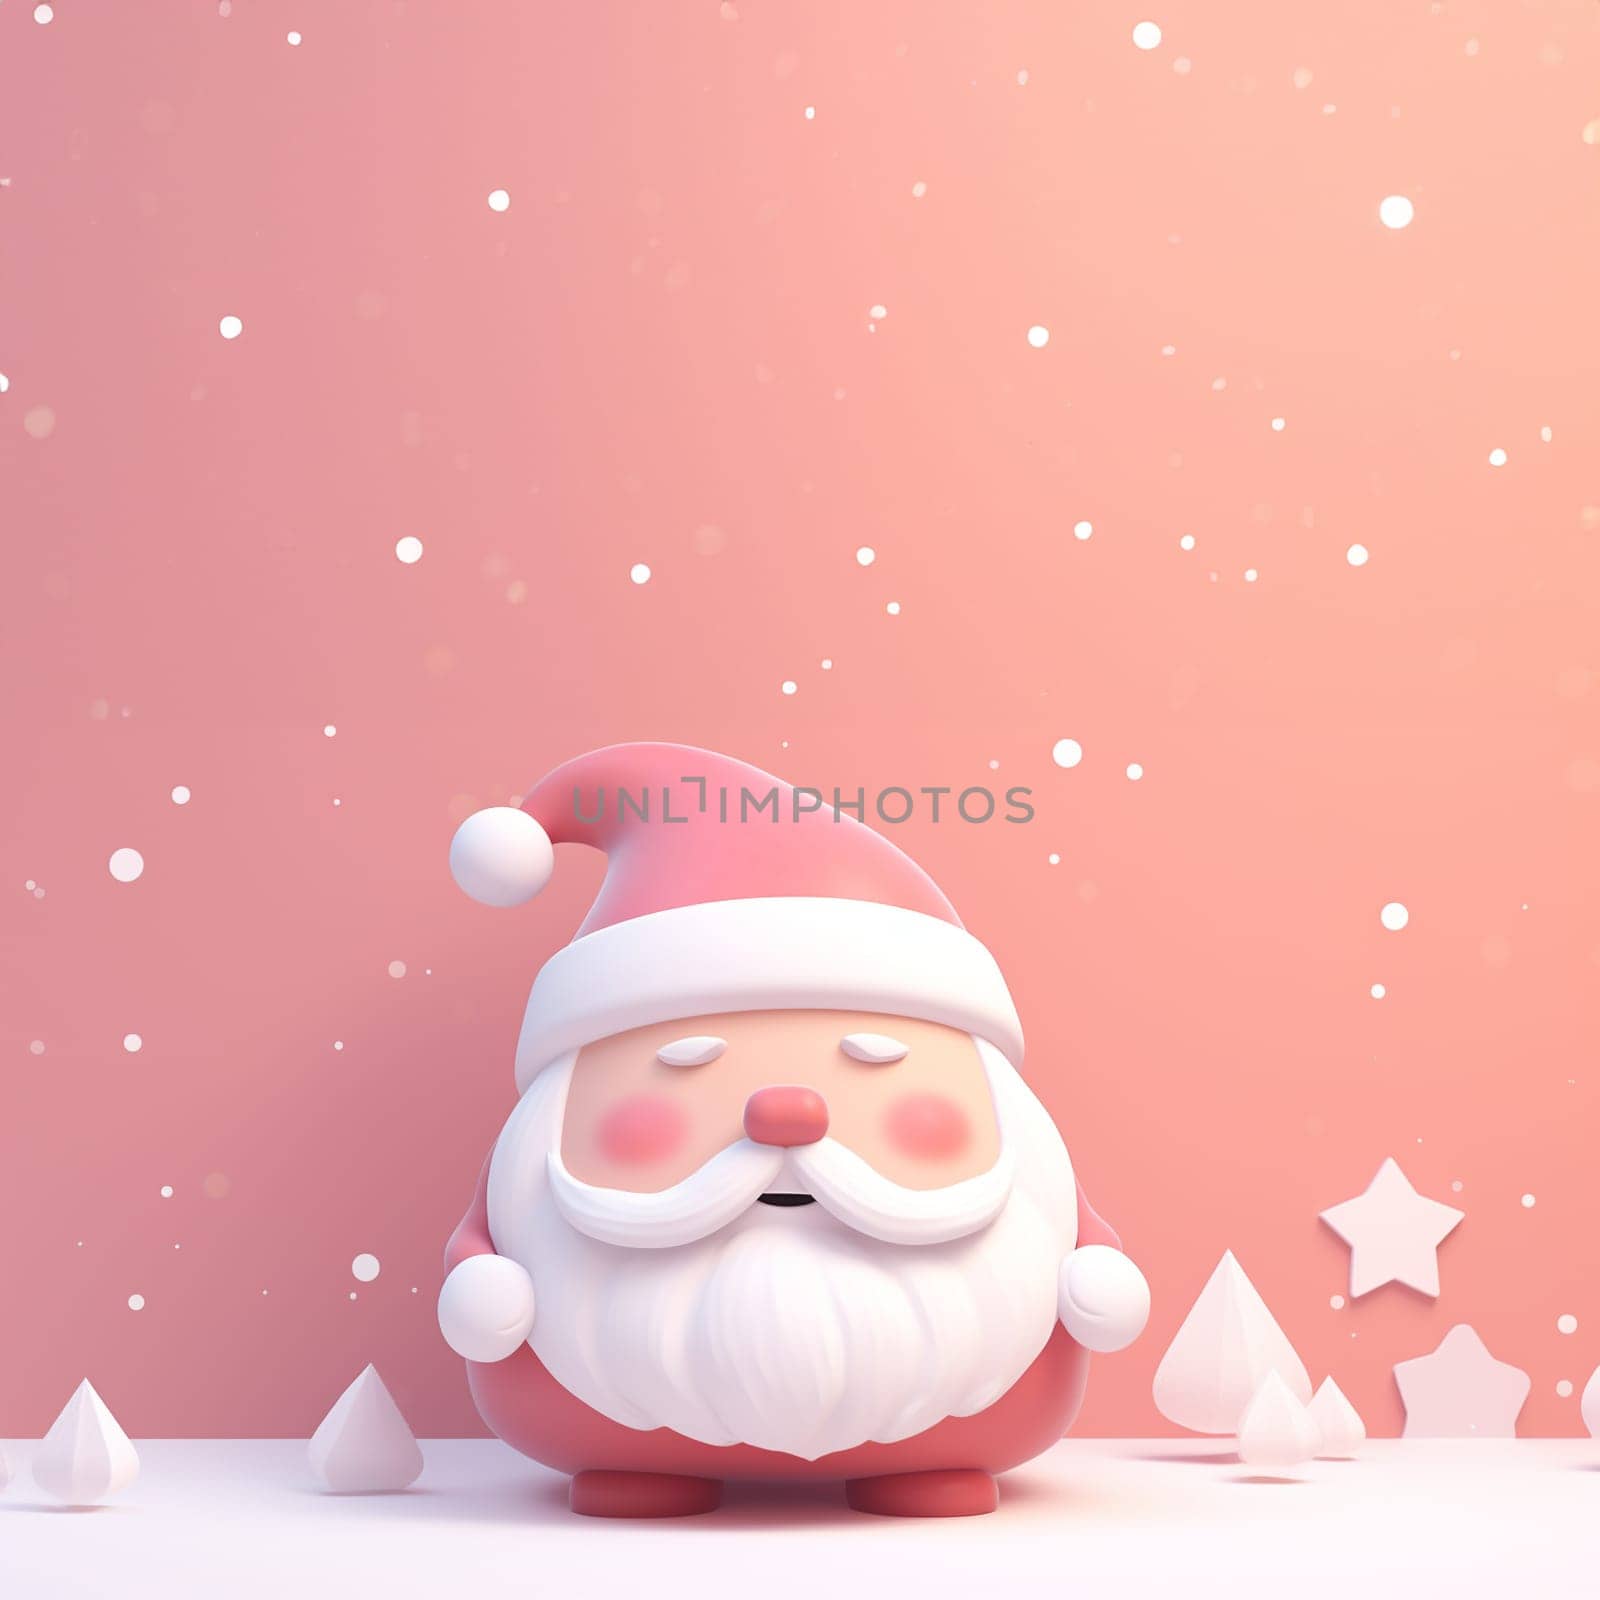 Cute Santa Claus cartoon pastel colored. Merry Christmas and Happy New Year. Realistic 3d cartoon Santa Claus with funny smile, with red bag of gifts. Xmas Holiday background. Greeting card, banner, web poster. illustration Copy space by Annebel146